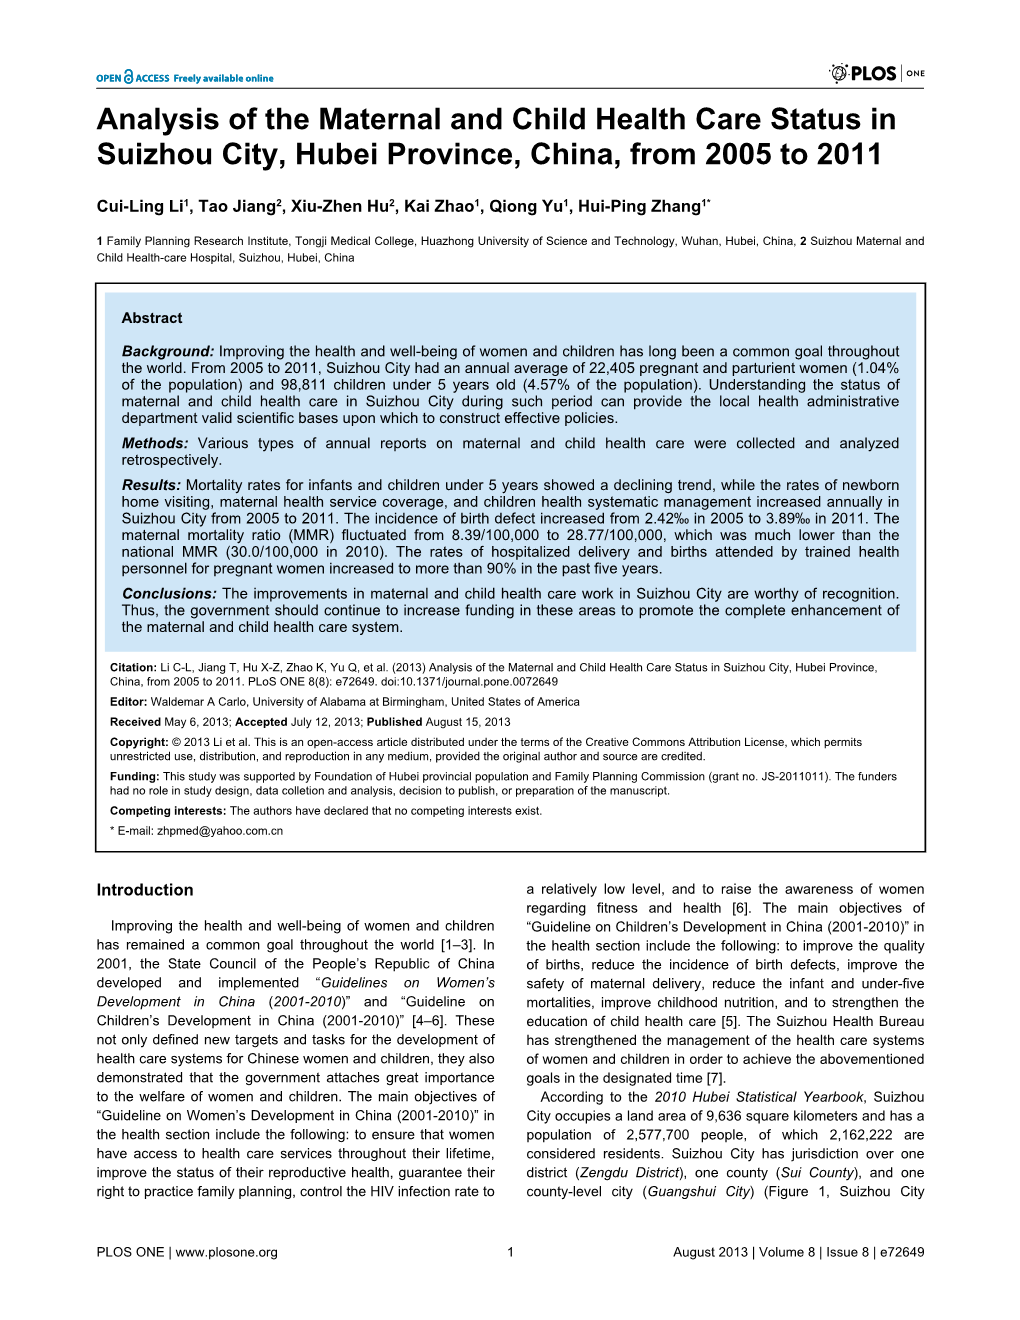 Analysis of the Maternal and Child Health Care Status in Suizhou City, Hubei Province, China, from 2005 to 2011